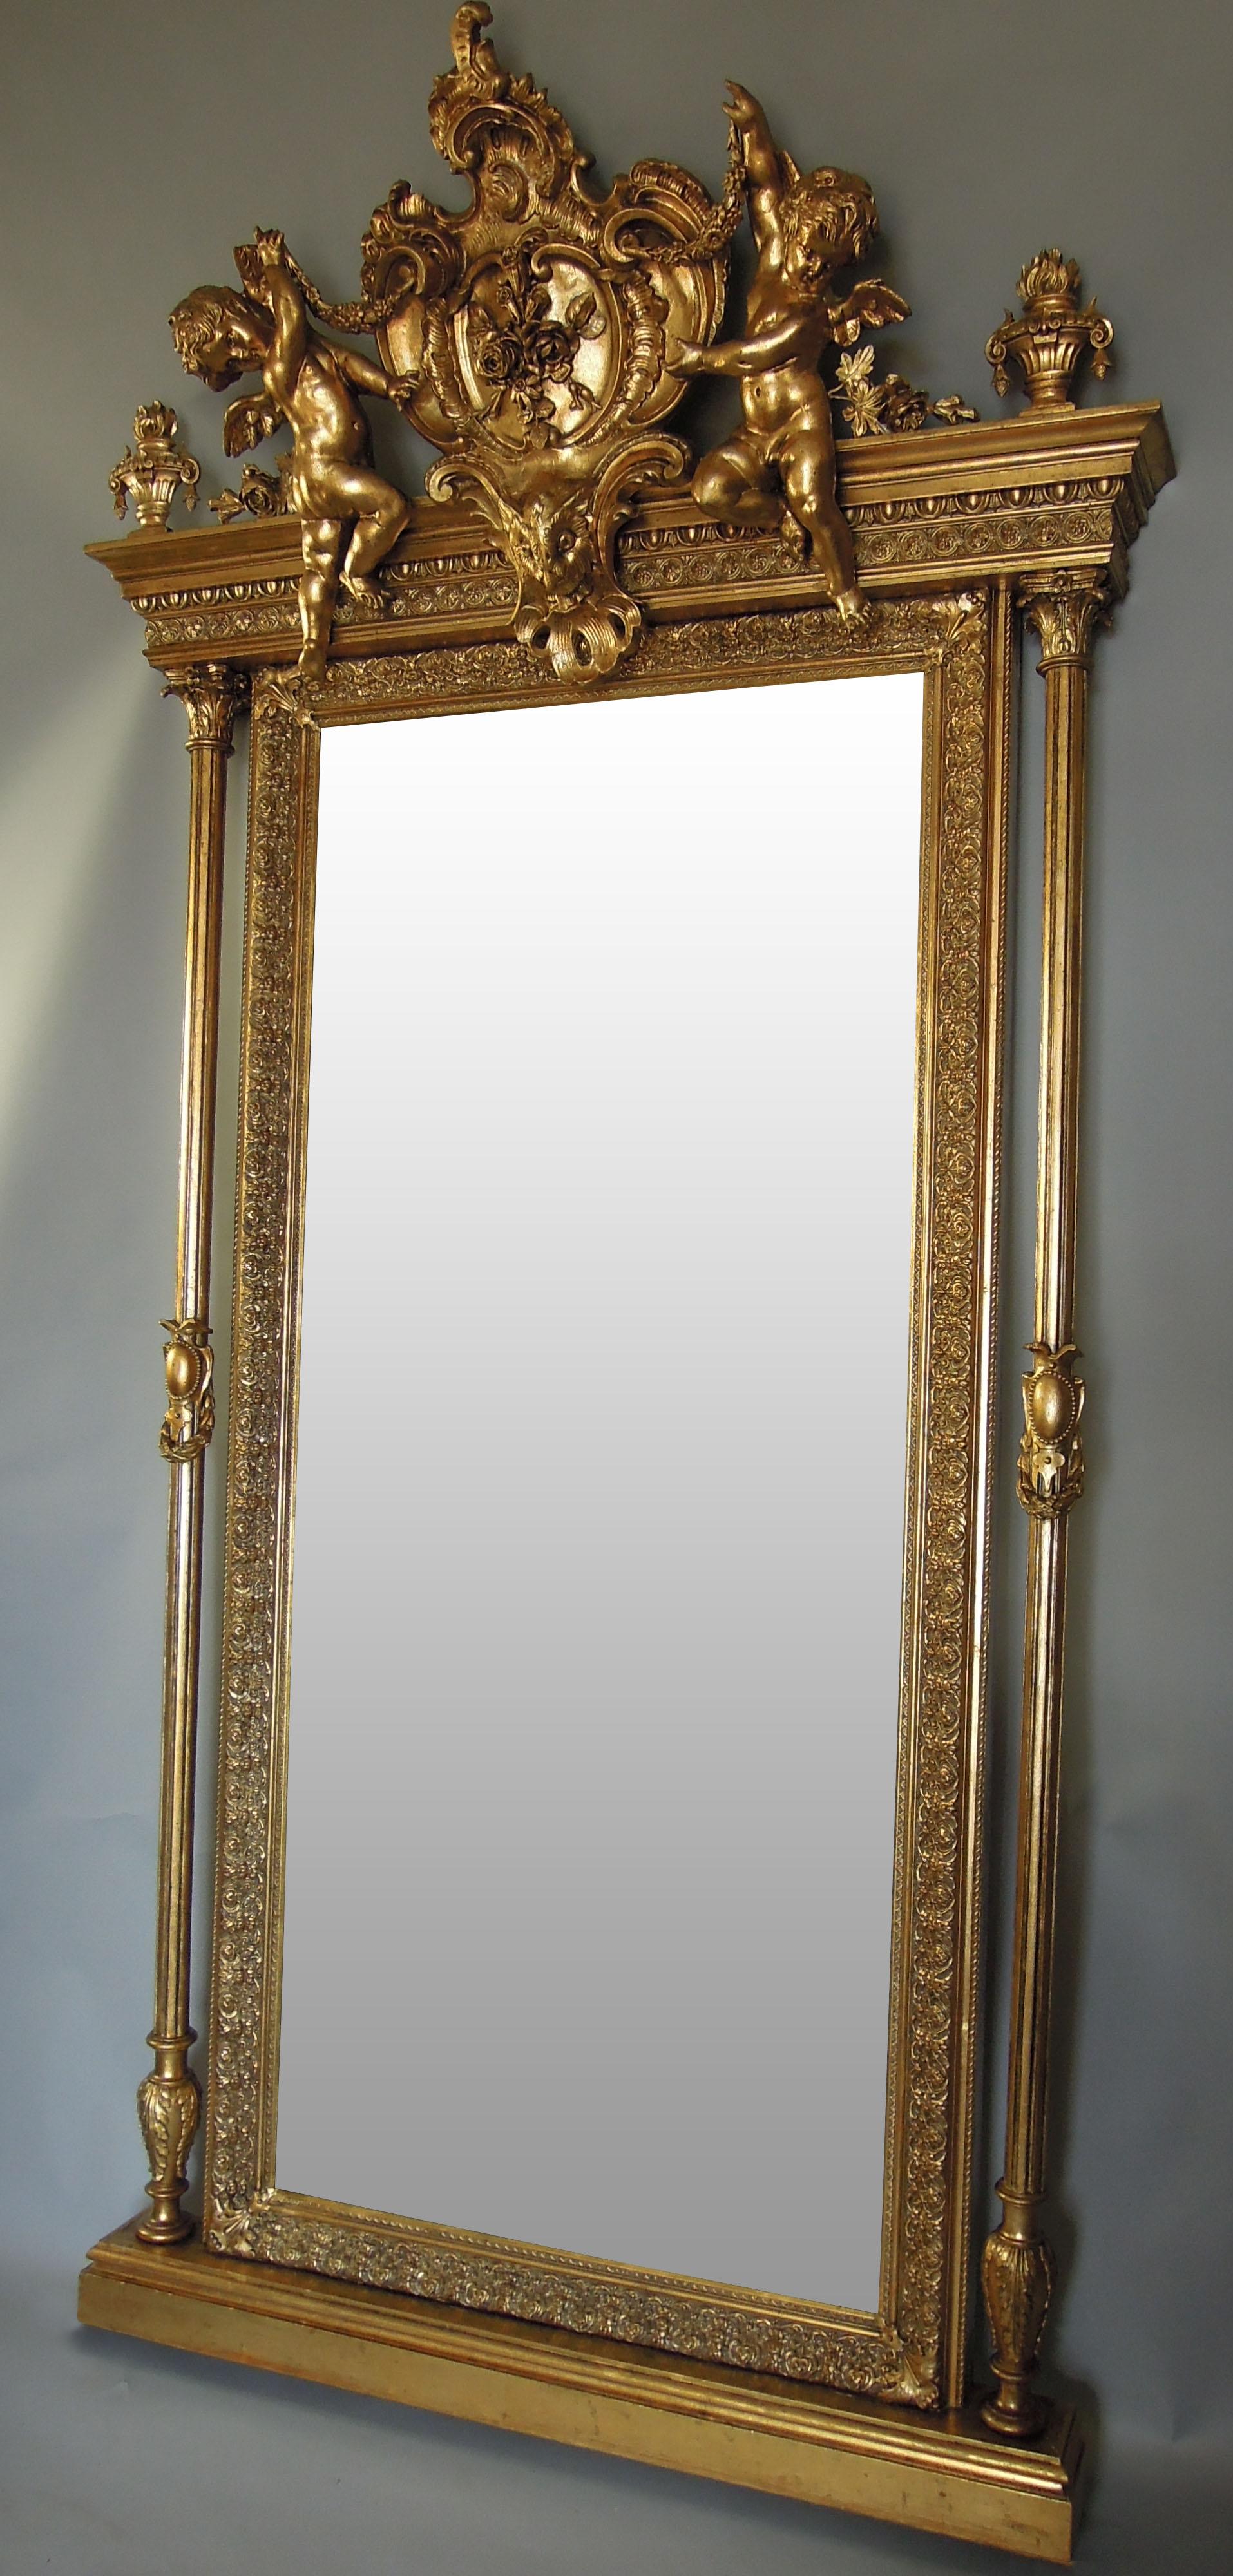 This piece was originally made in Bohemia circa 1860 to exemplify the Baroque style. The 25-carat gold plated wall mirror would have been positioned in the main entrance hallway of a villa or mansion, and with such expressive motifs of angels